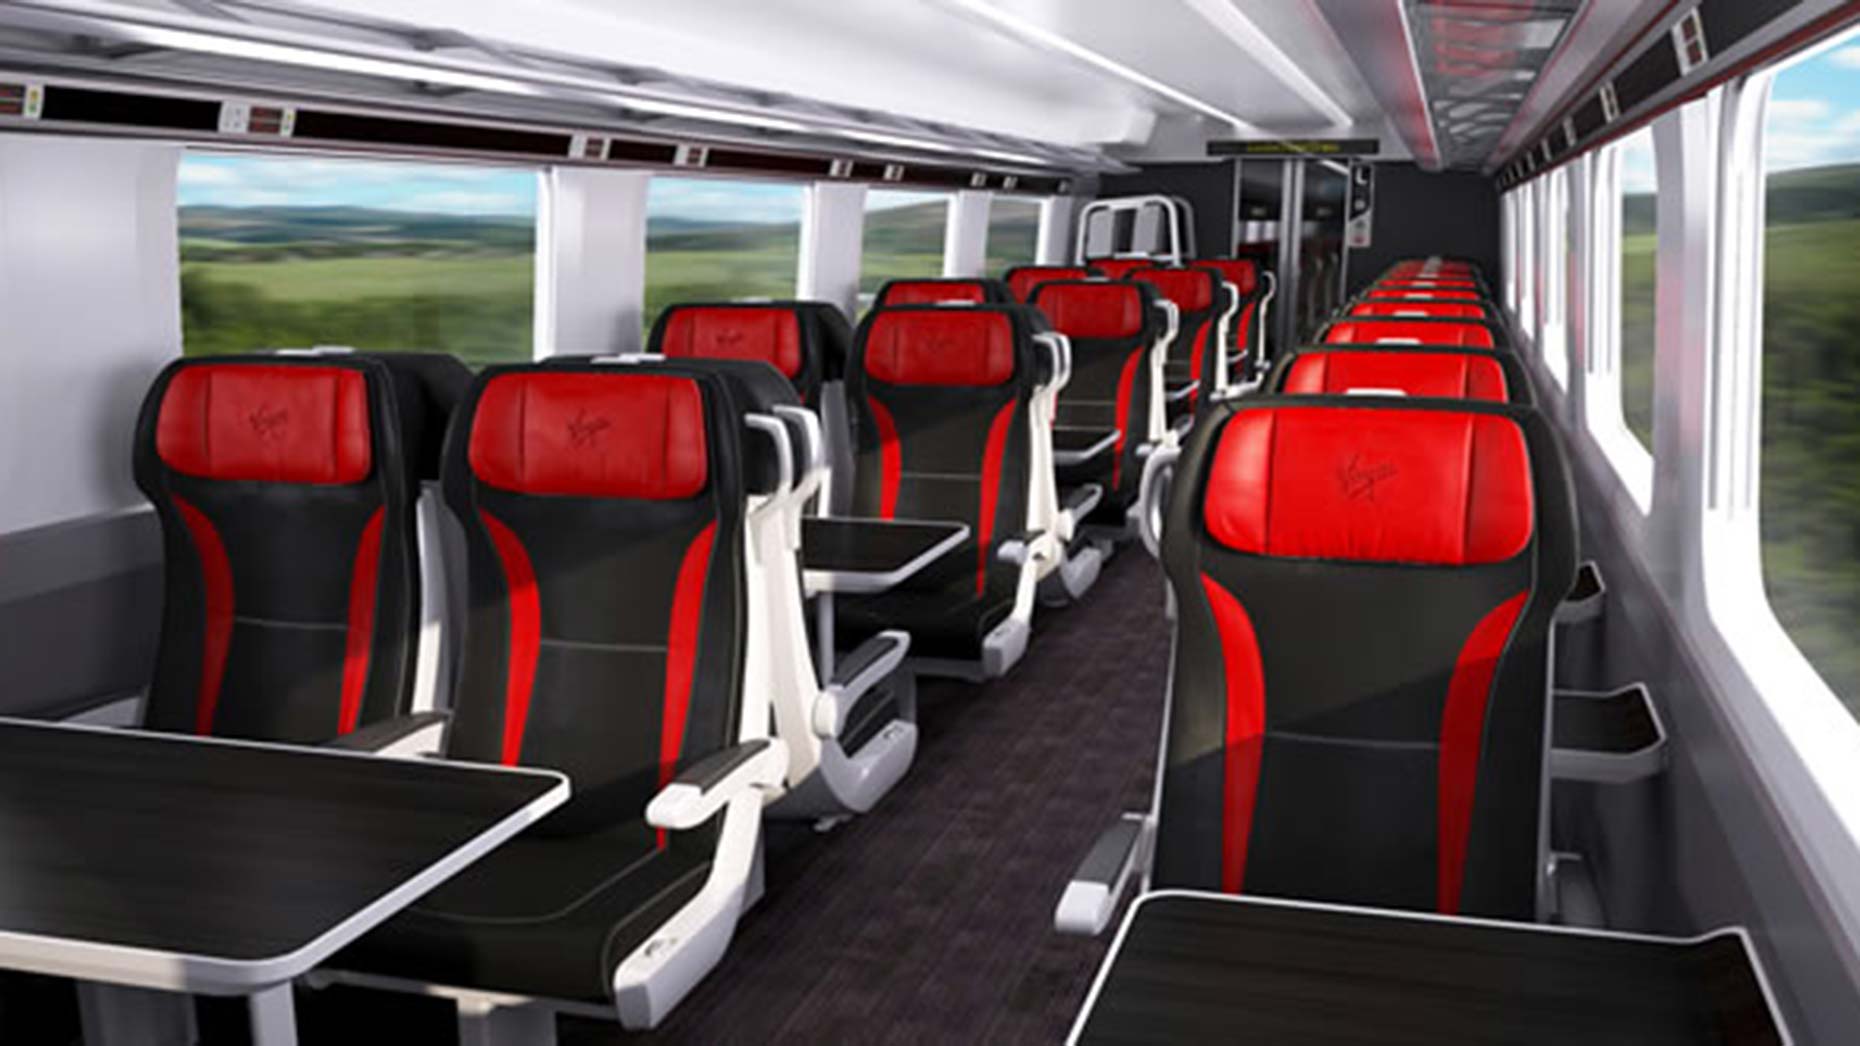 Artist impression of First class in the upcoming Virgin Azuma trains